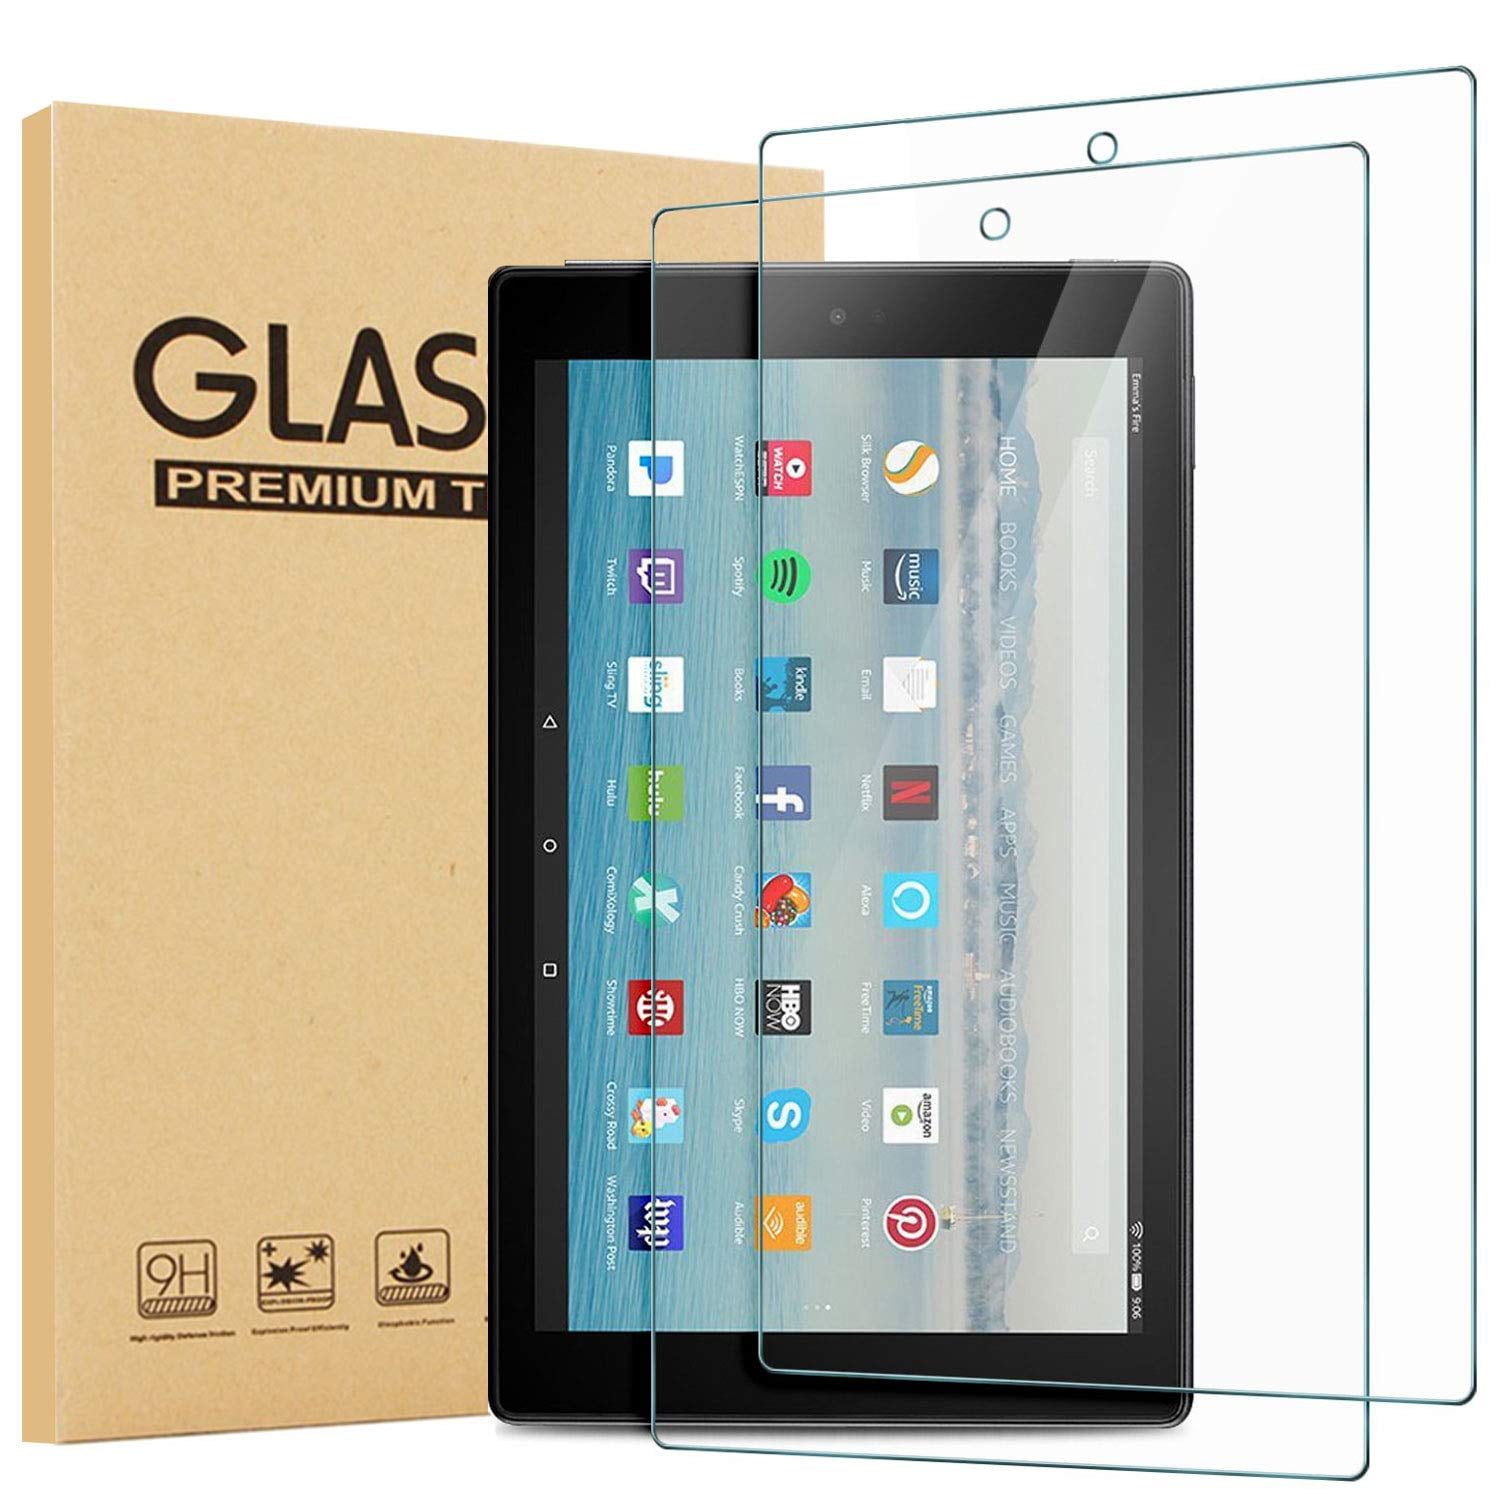 2Pcs Premium 9H Tempered Glass Screen Protector For Kindle fire 7 2015/ HD 7 8 